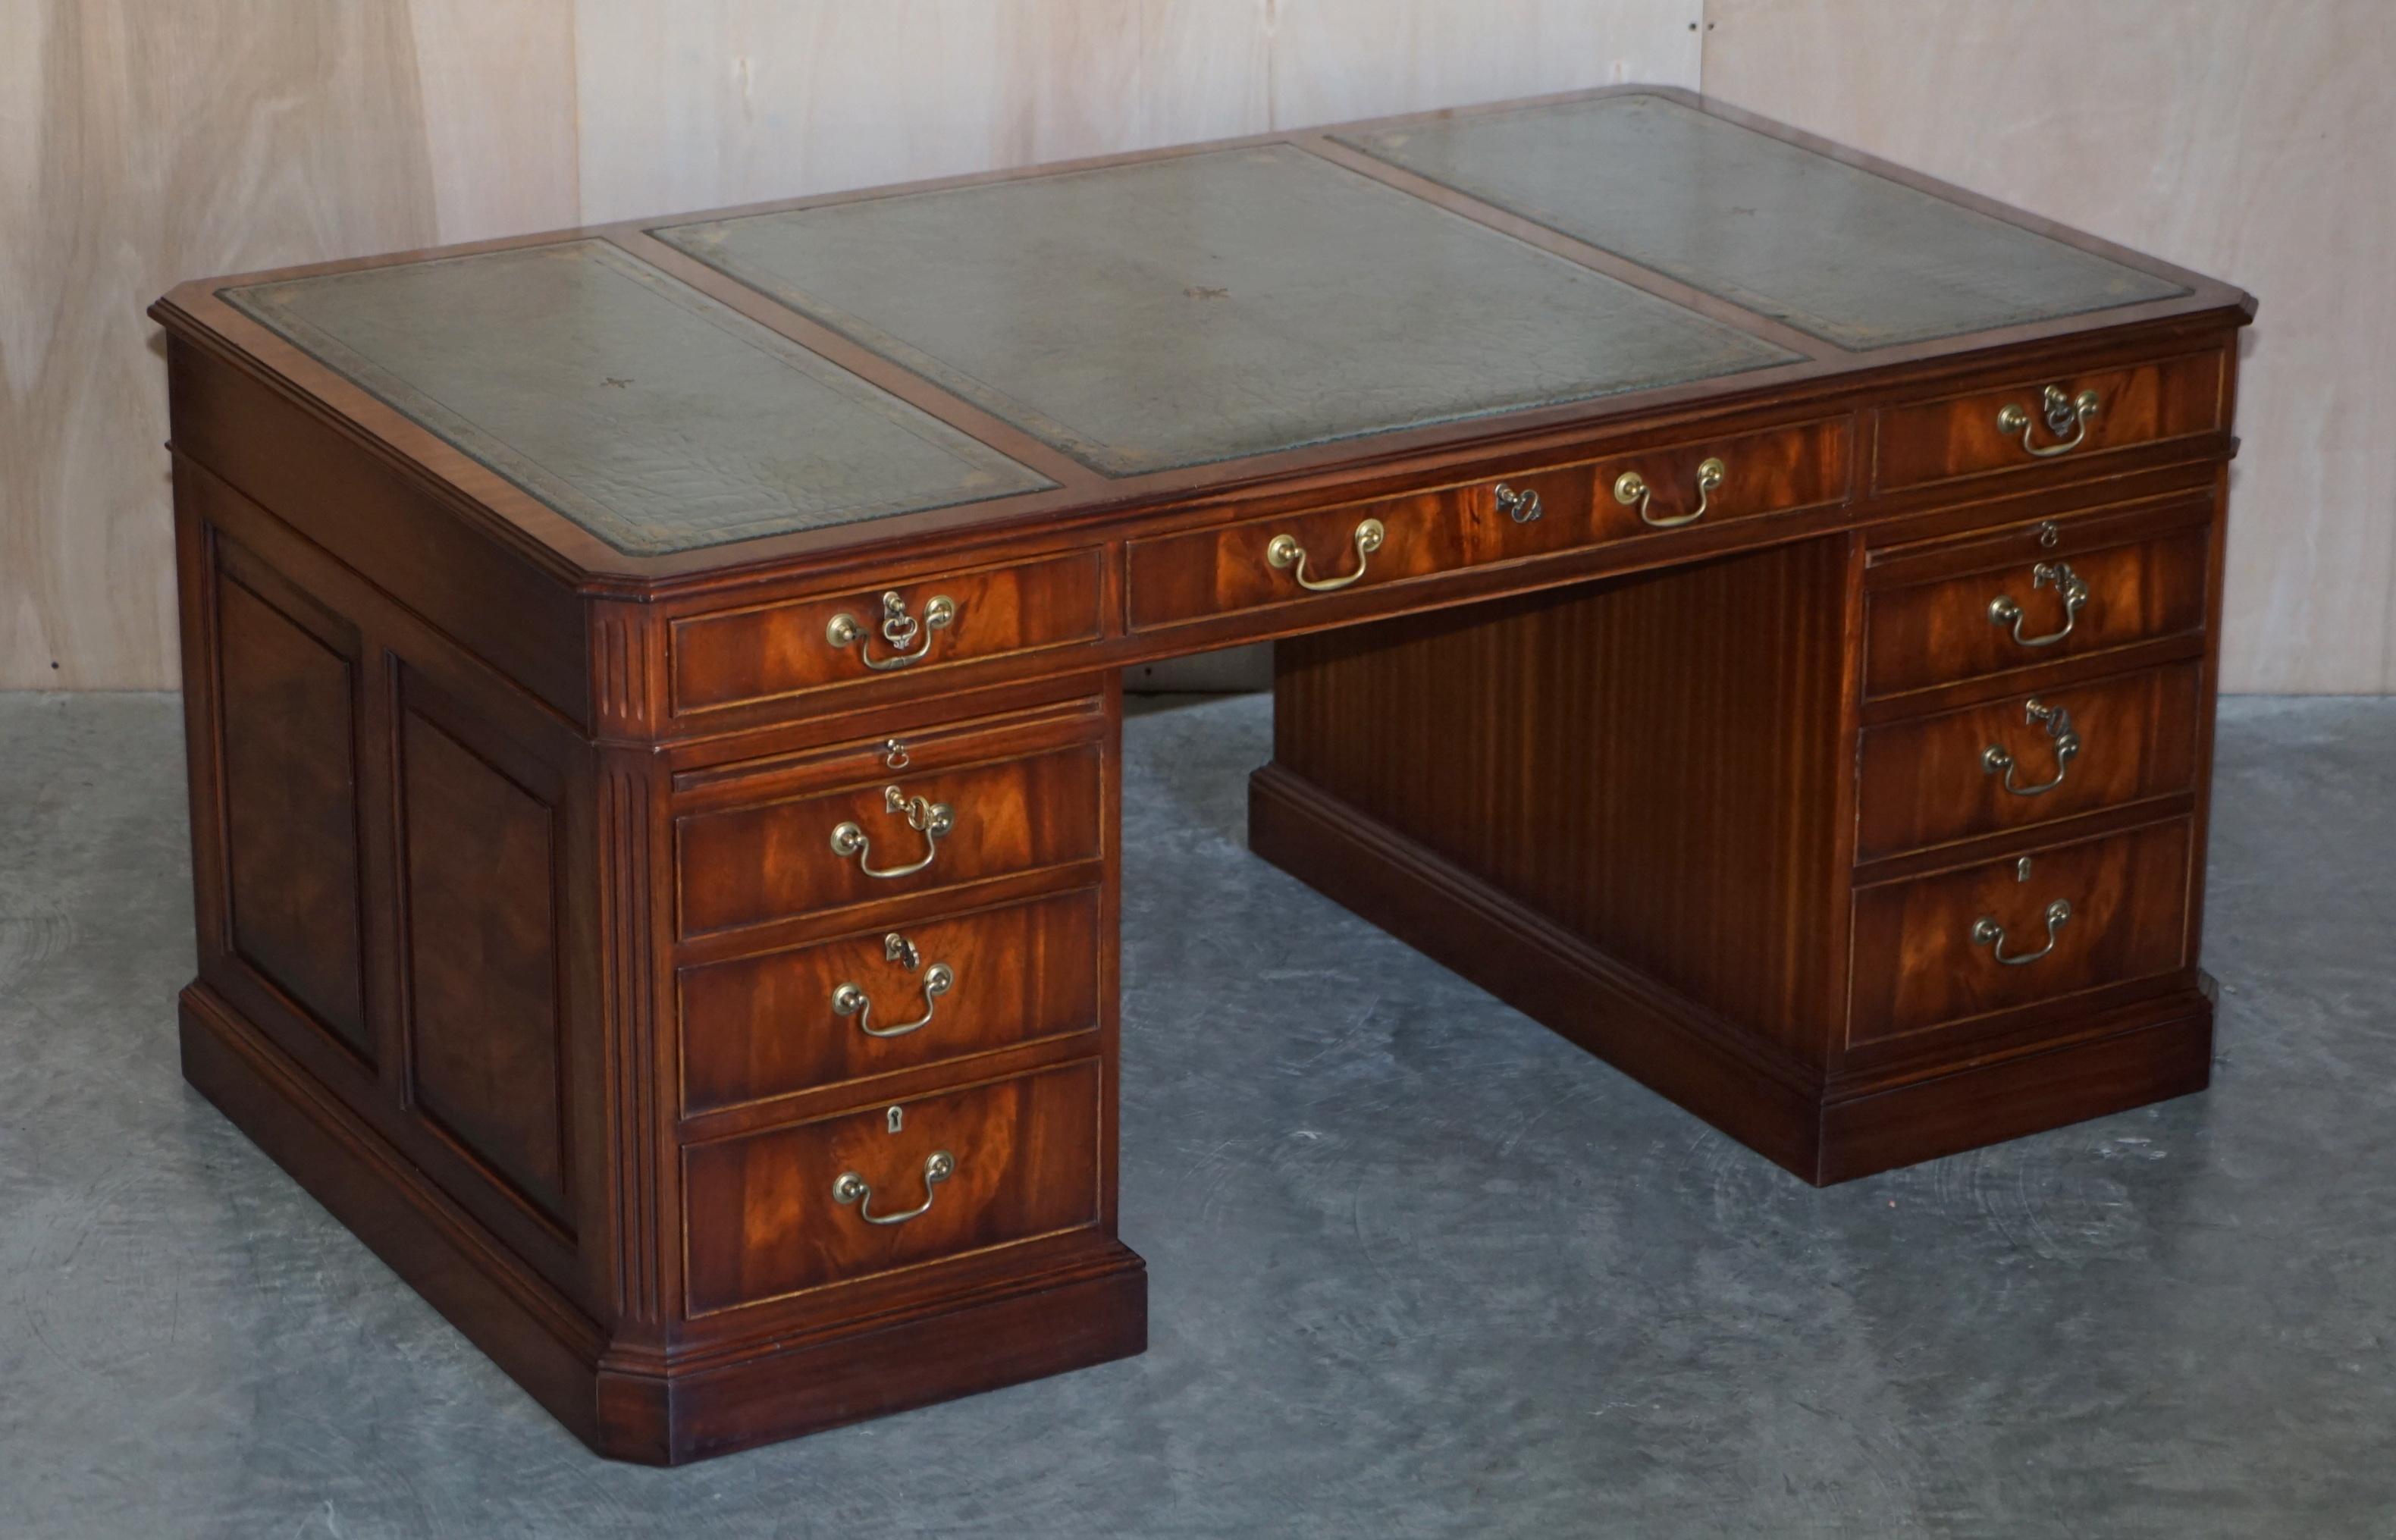 We are delighted to offer for sale this lovely vintage flamed mahogany large twin pedestal partner desk with Regency blue leather top and twin “butler” slip serving trays.

A very good looking and nicely formed desk, its much larger than normal,